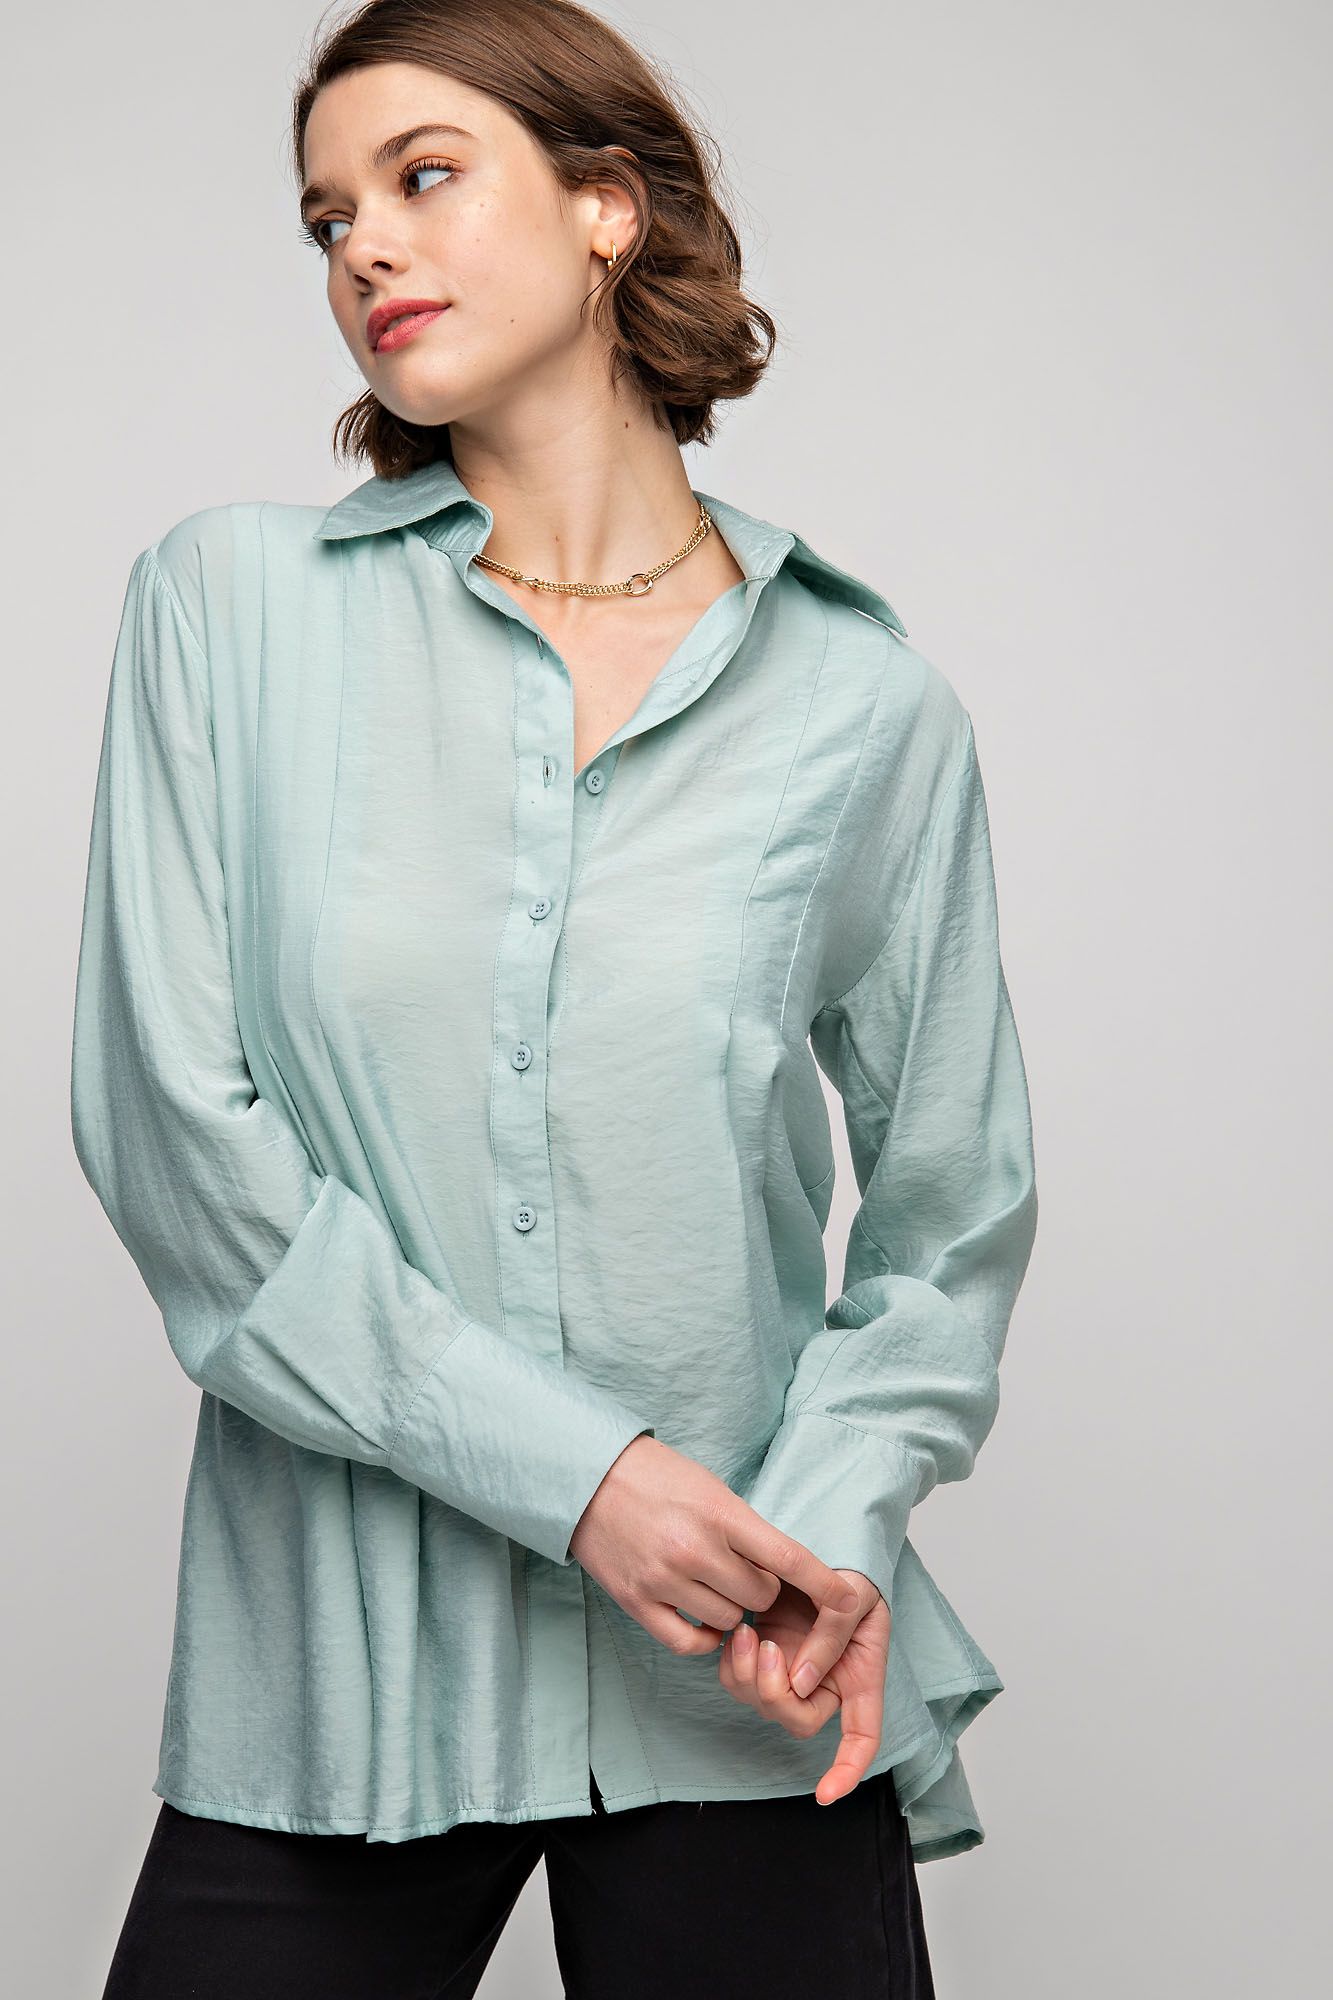 Easel Plus Pleated Button Down Long Sleeve Shirt Tops